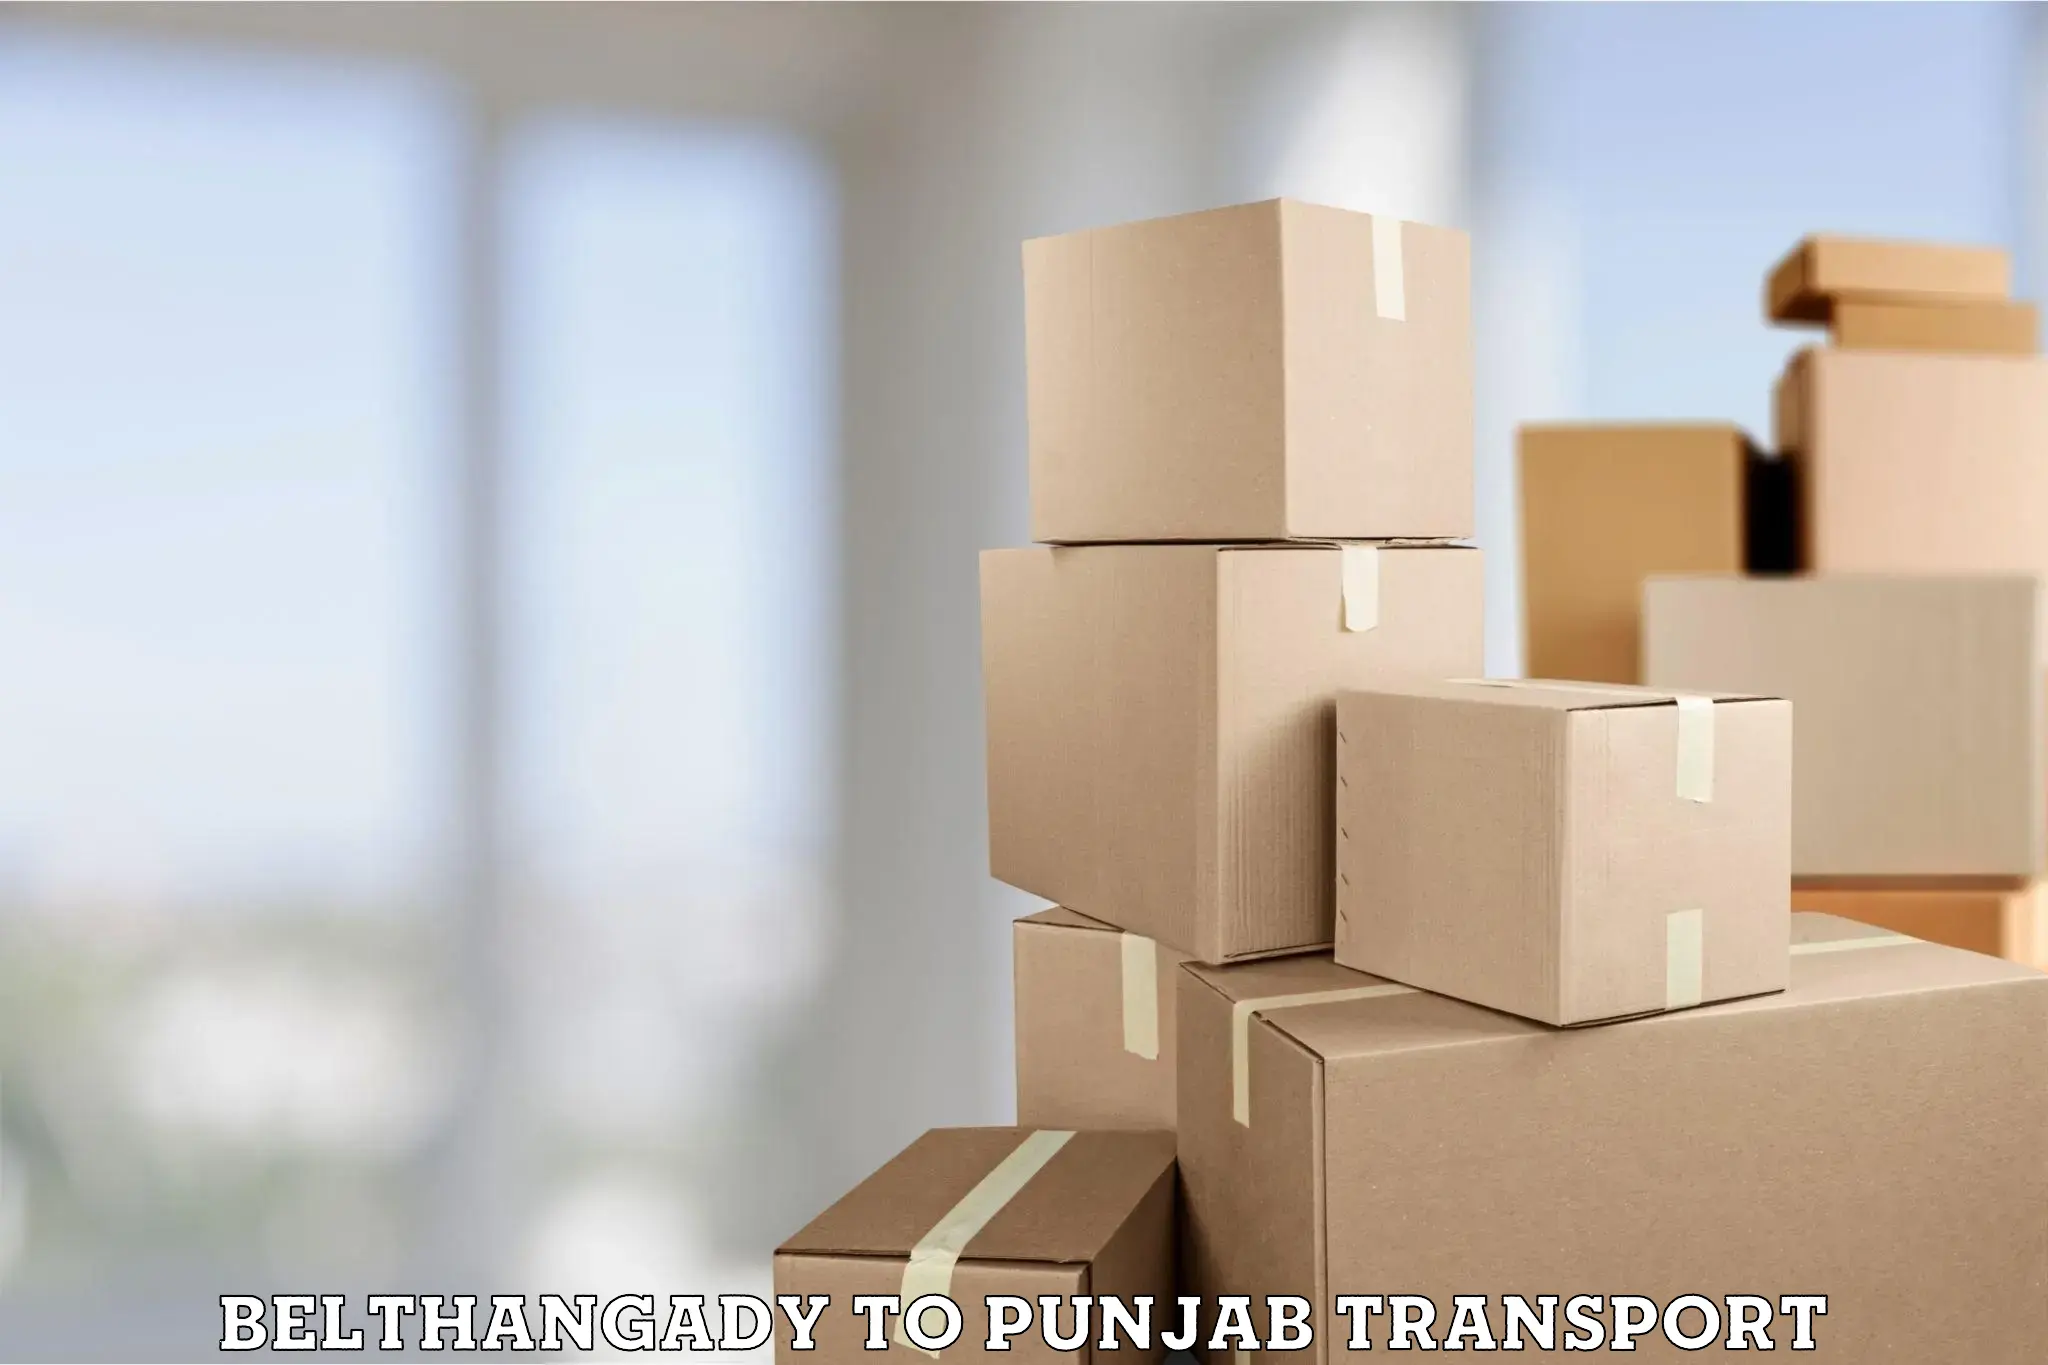 Daily parcel service transport Belthangady to Pathankot